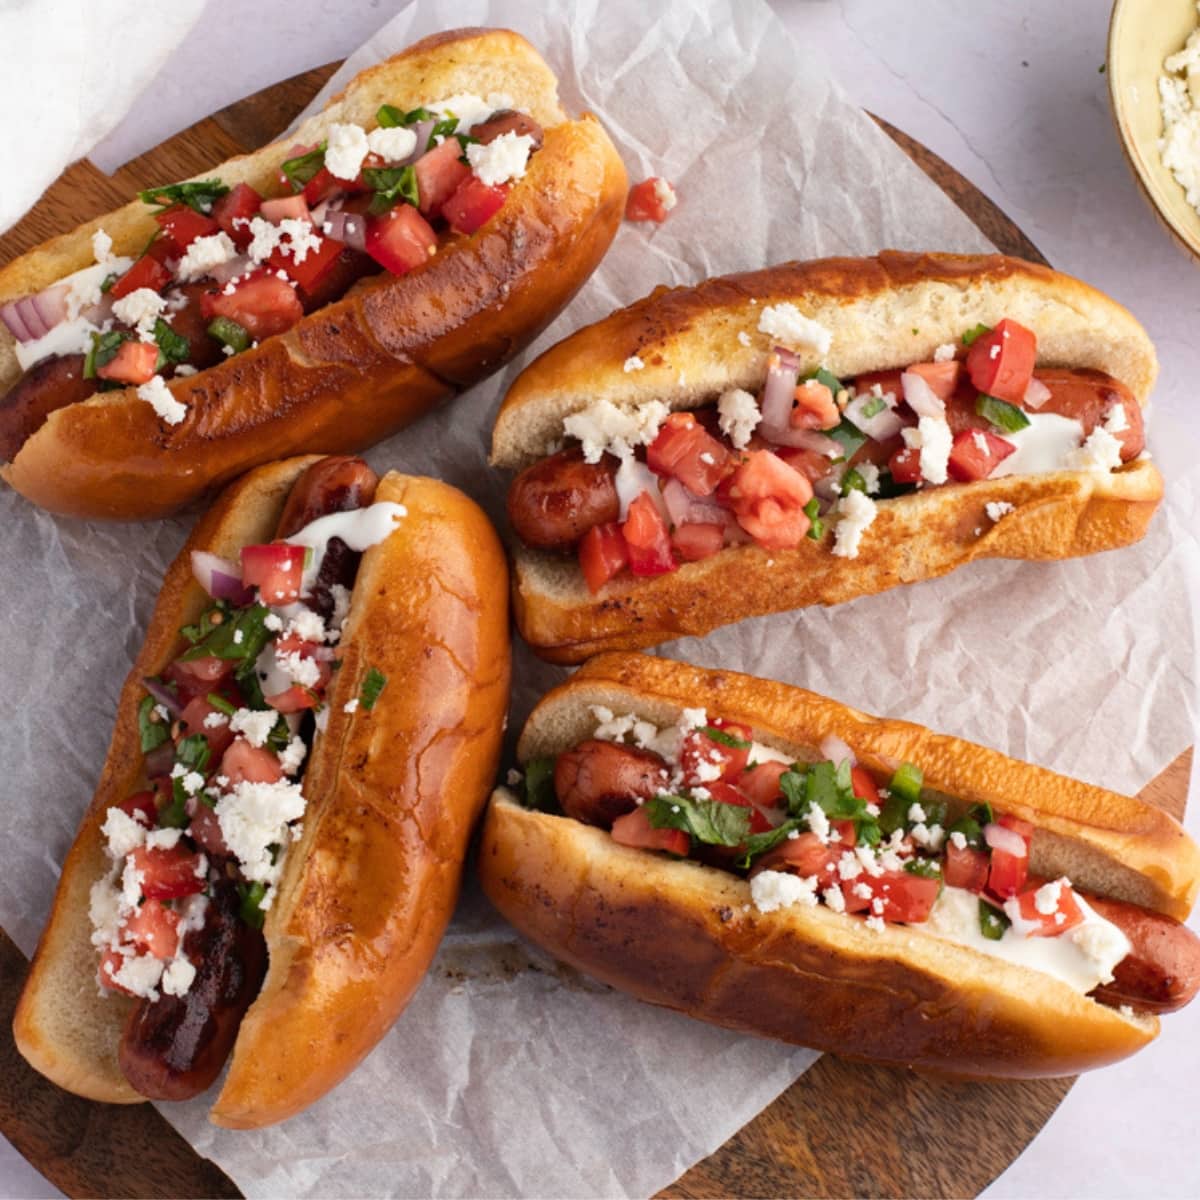 Mexican Style Hot Dogs - Culinary Ginger